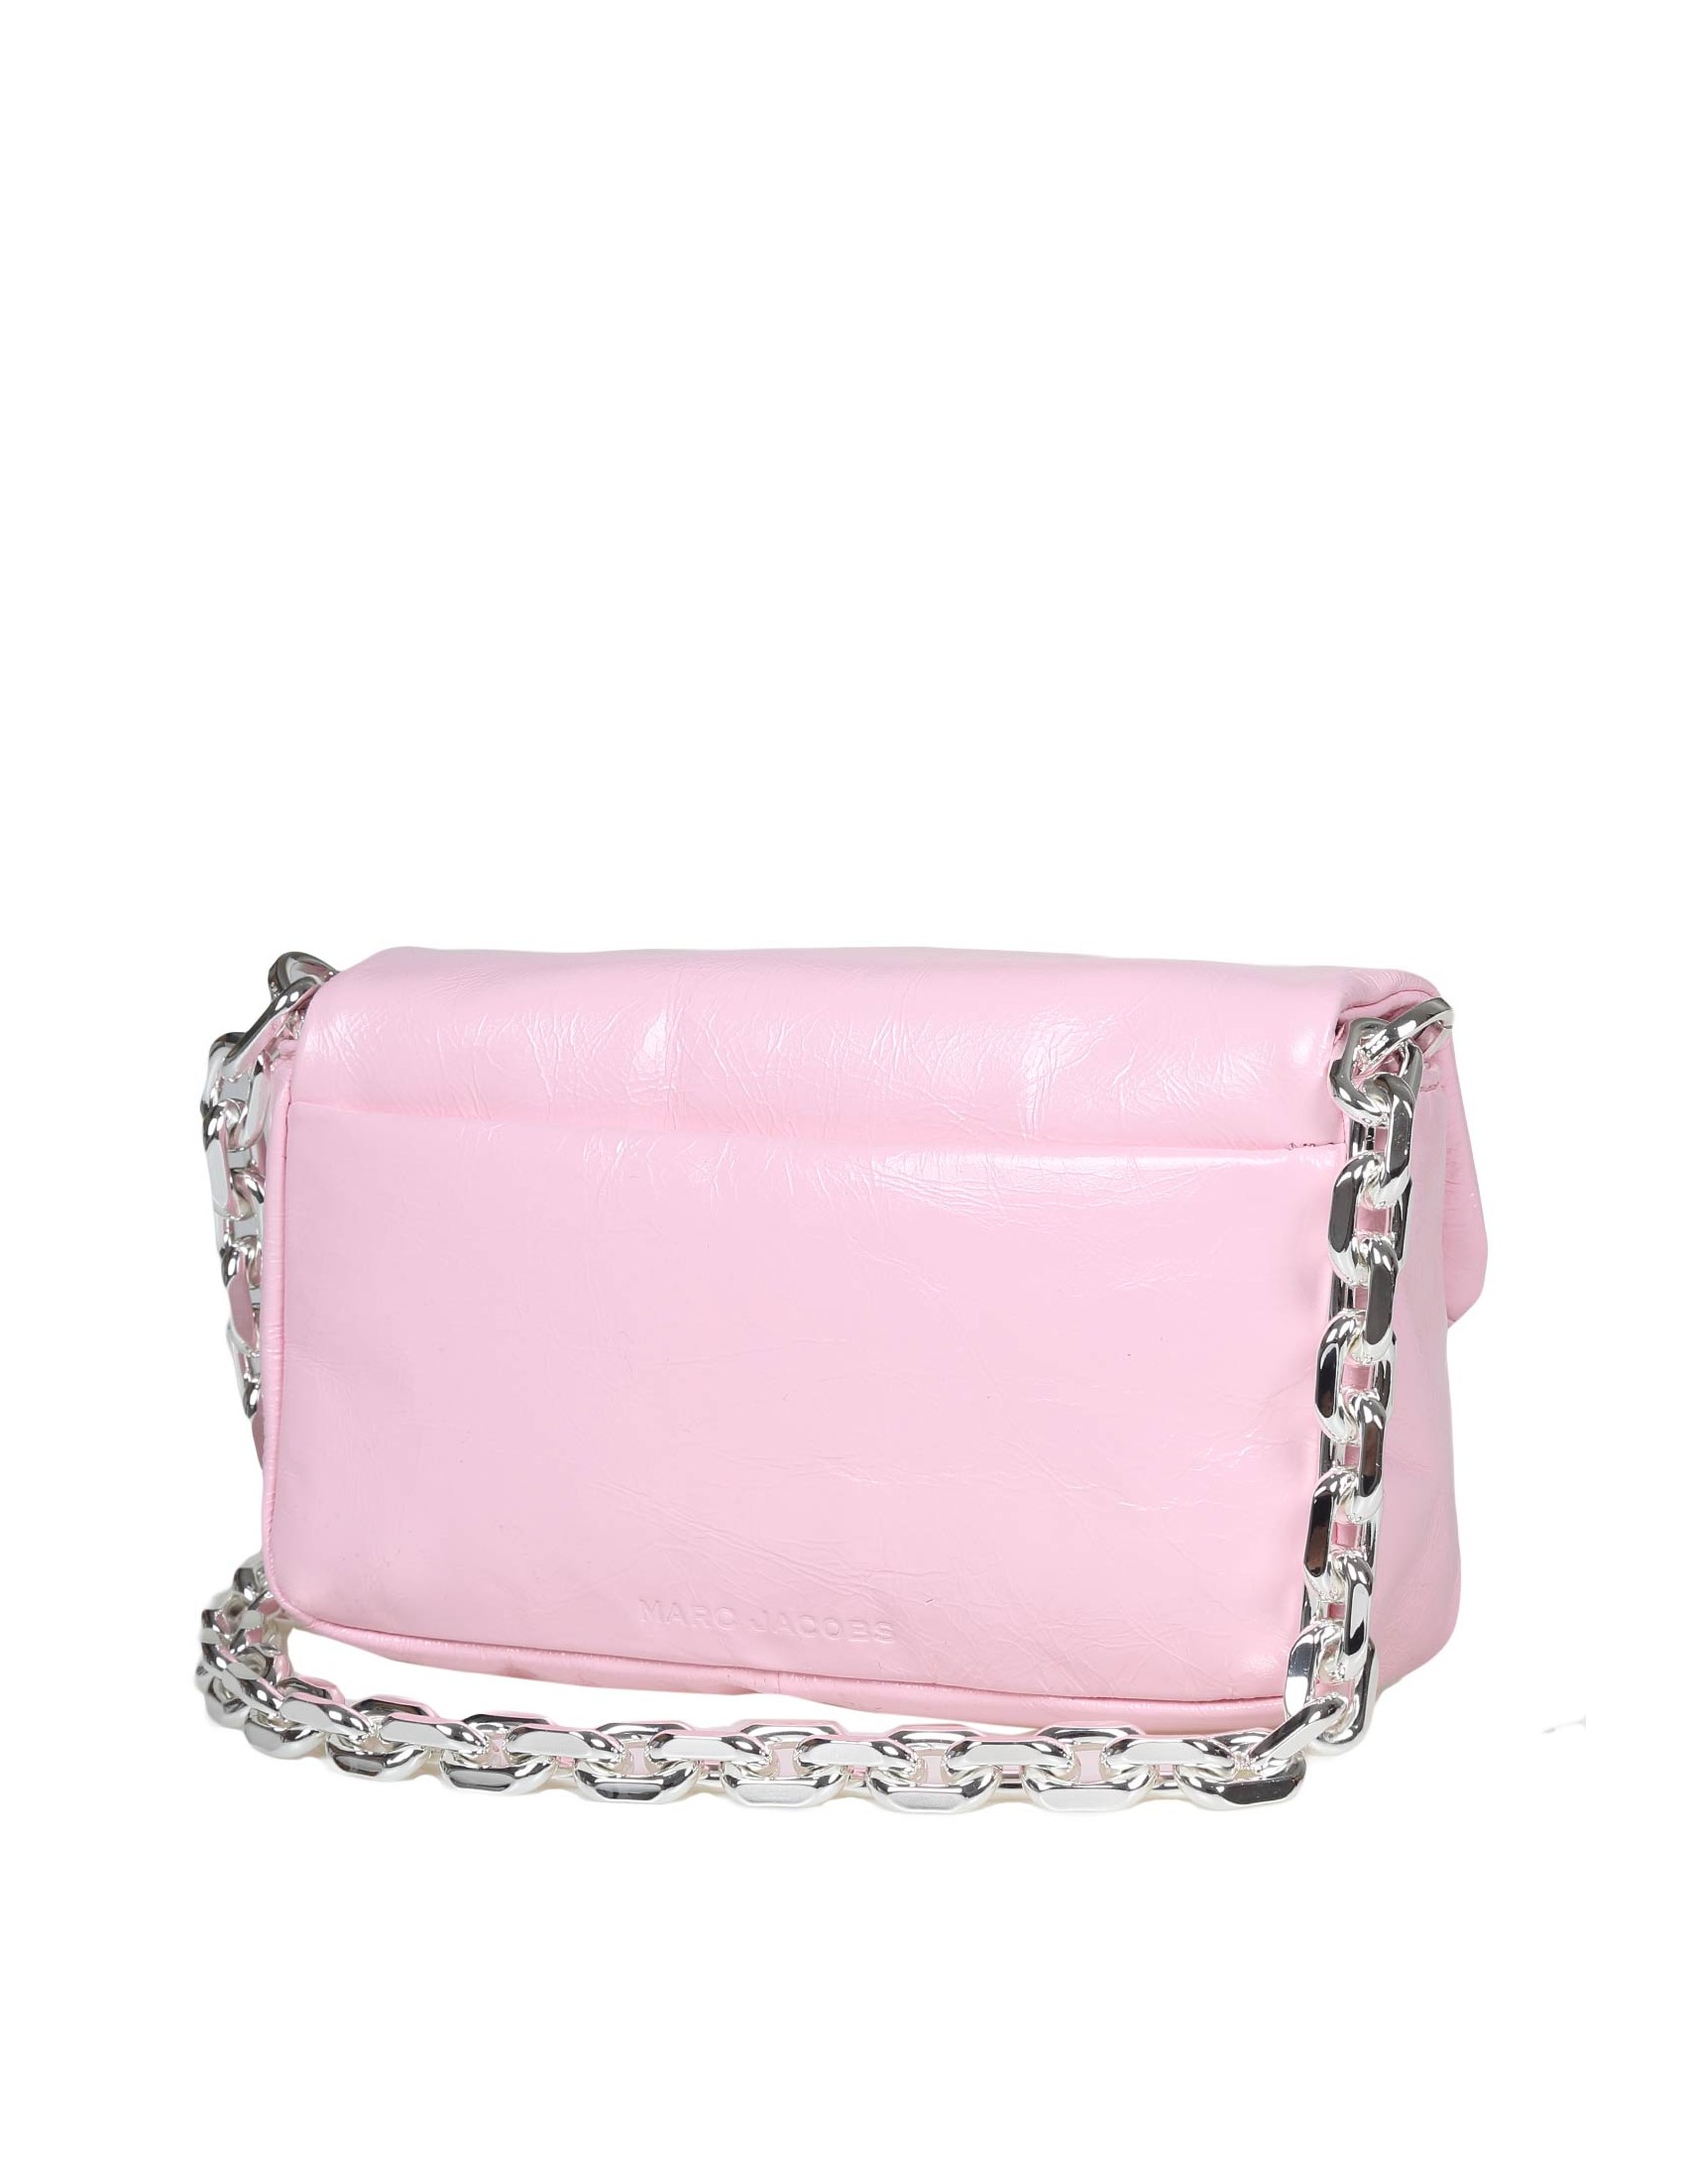 MARC JACOBS: mini bag for woman - Pink  Marc Jacobs mini bag 2P3HSH001H01  online at